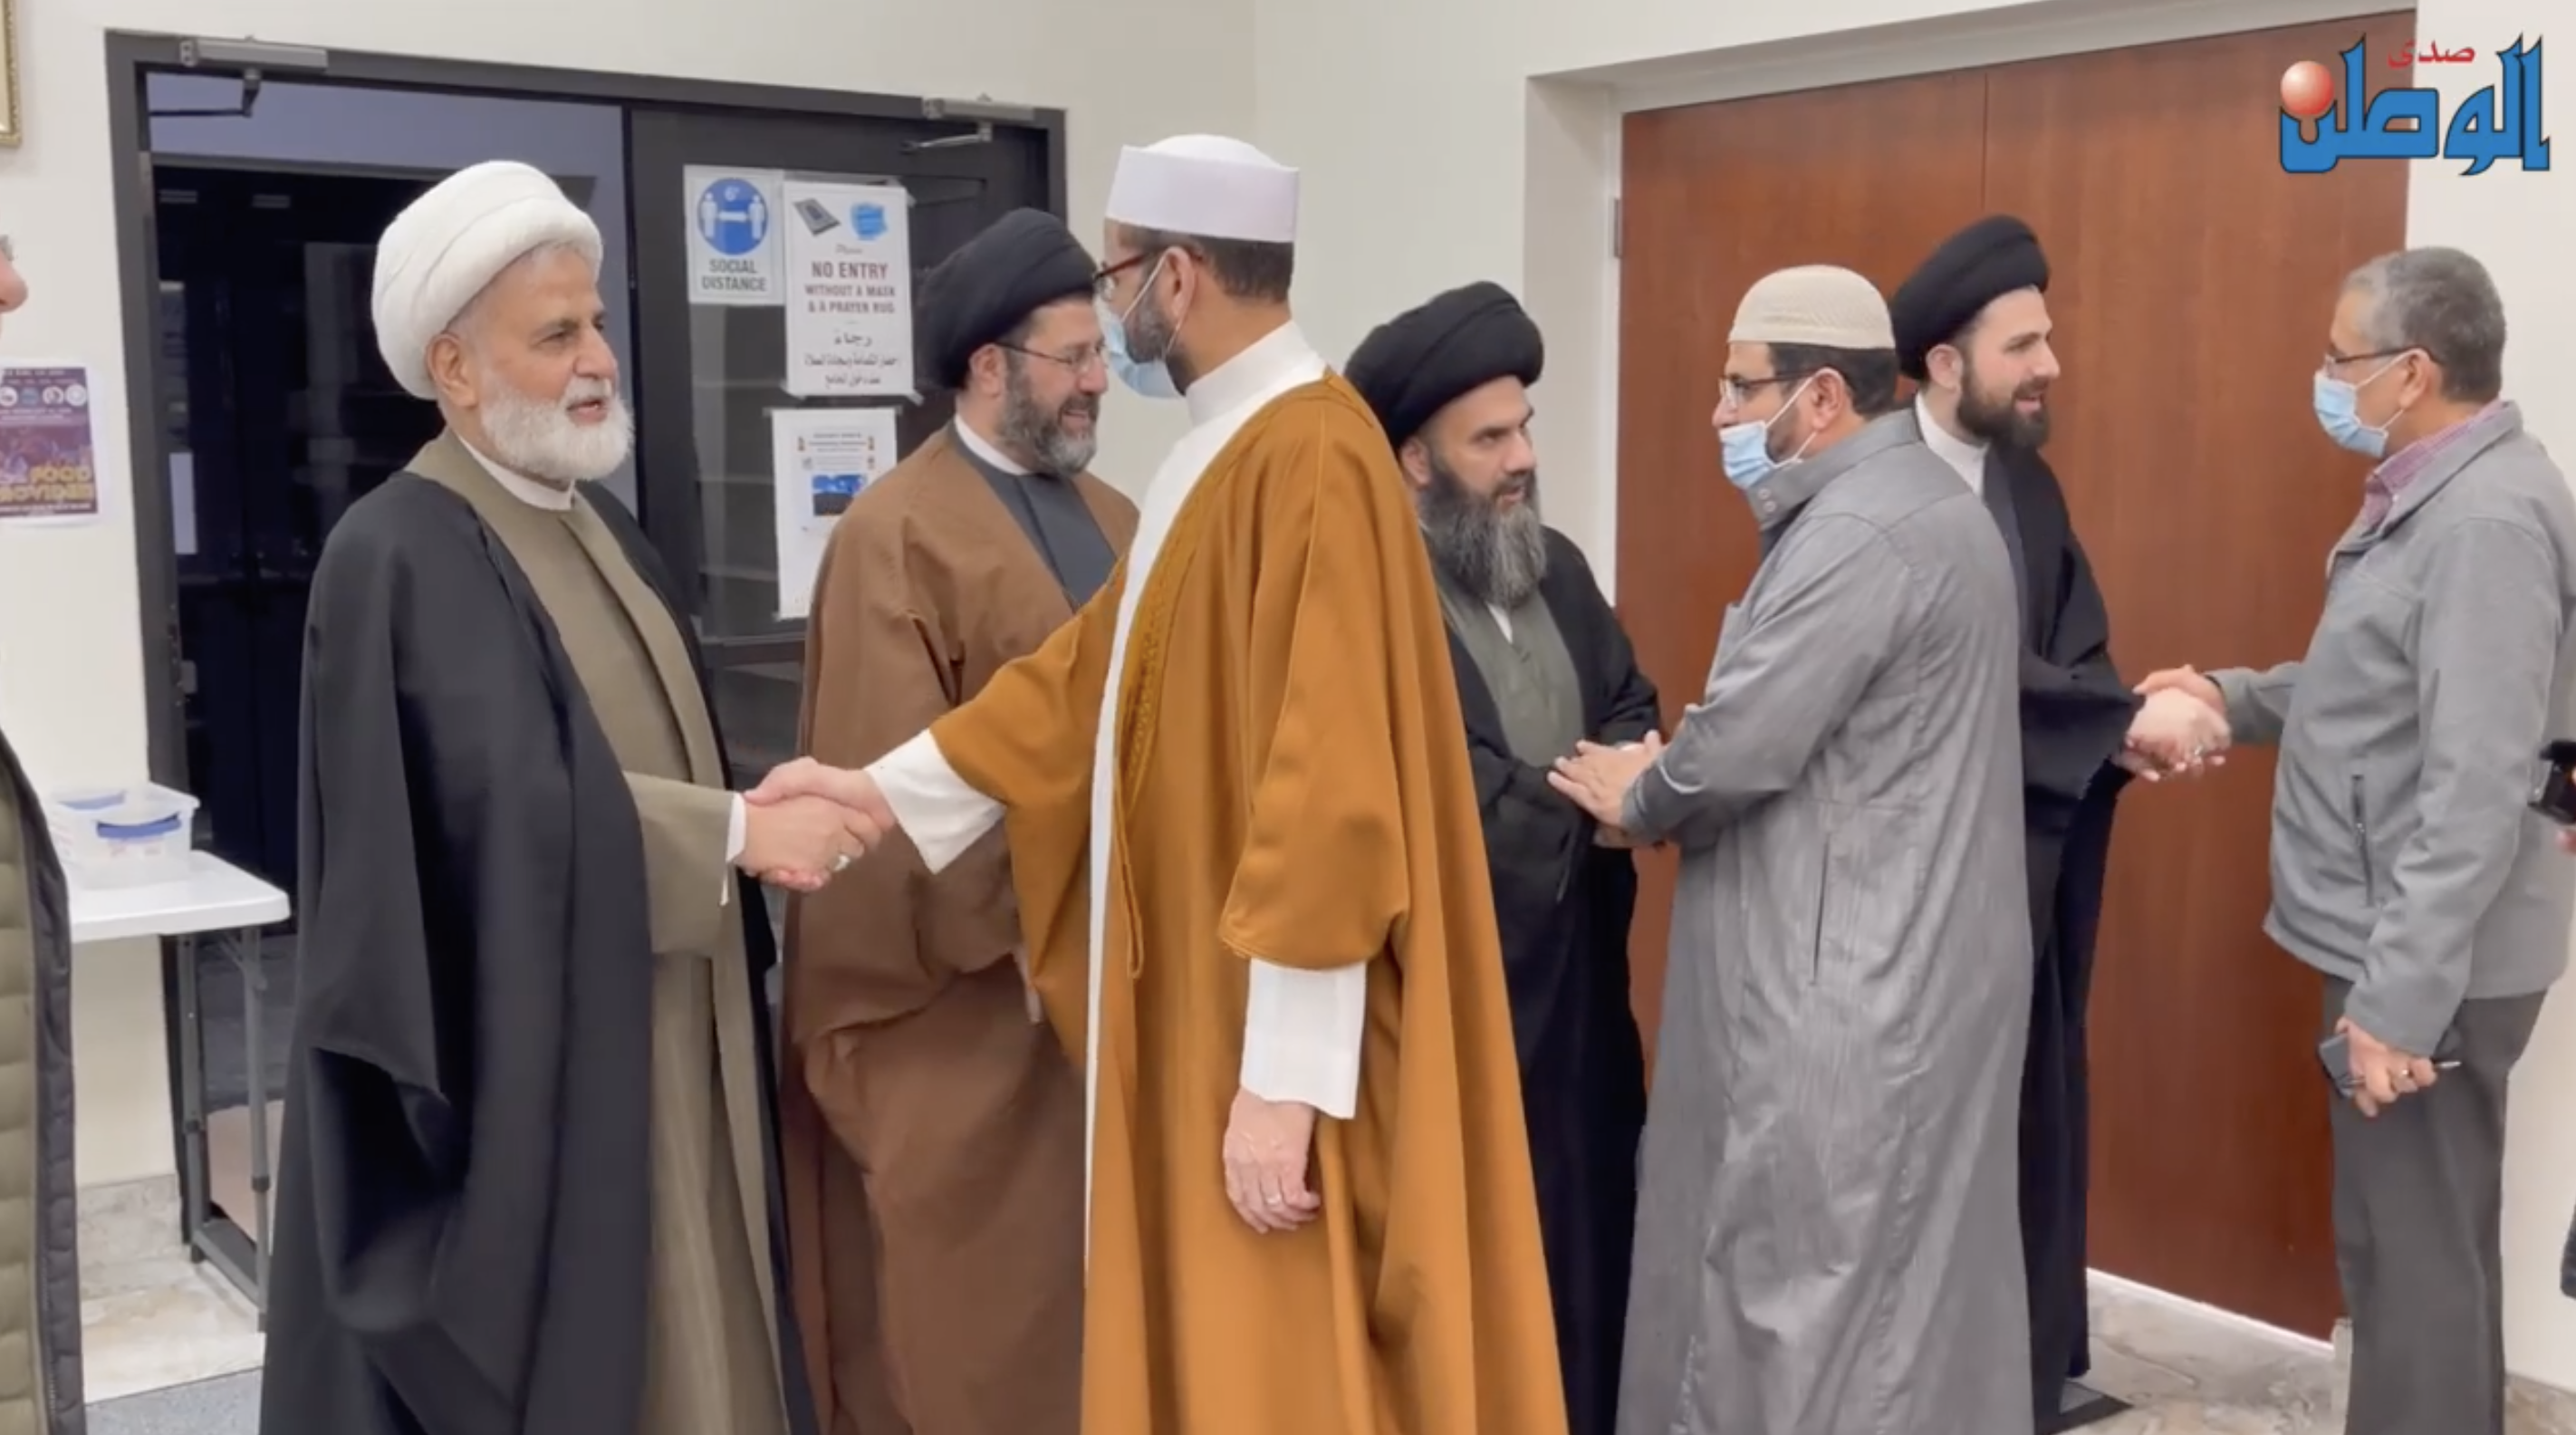 Local faith leaders meet with Al-Huda officials in at the mosque Dearborn. Screengrab/The Arab American News